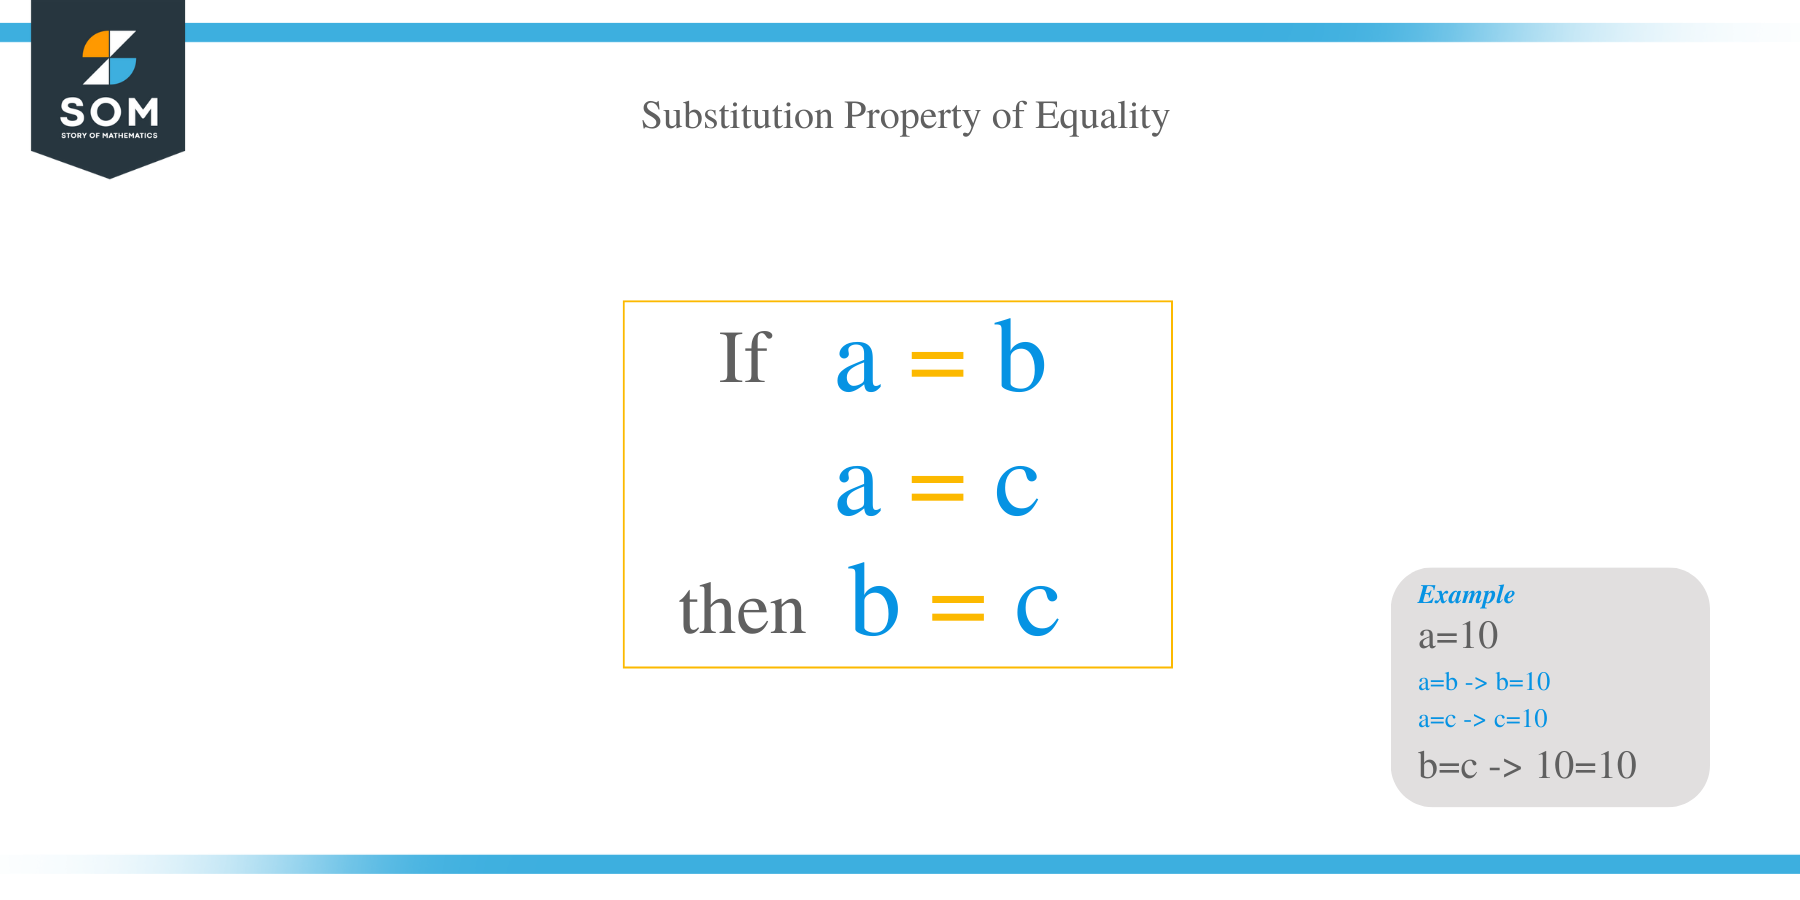 What Is Substitution Property of Equality